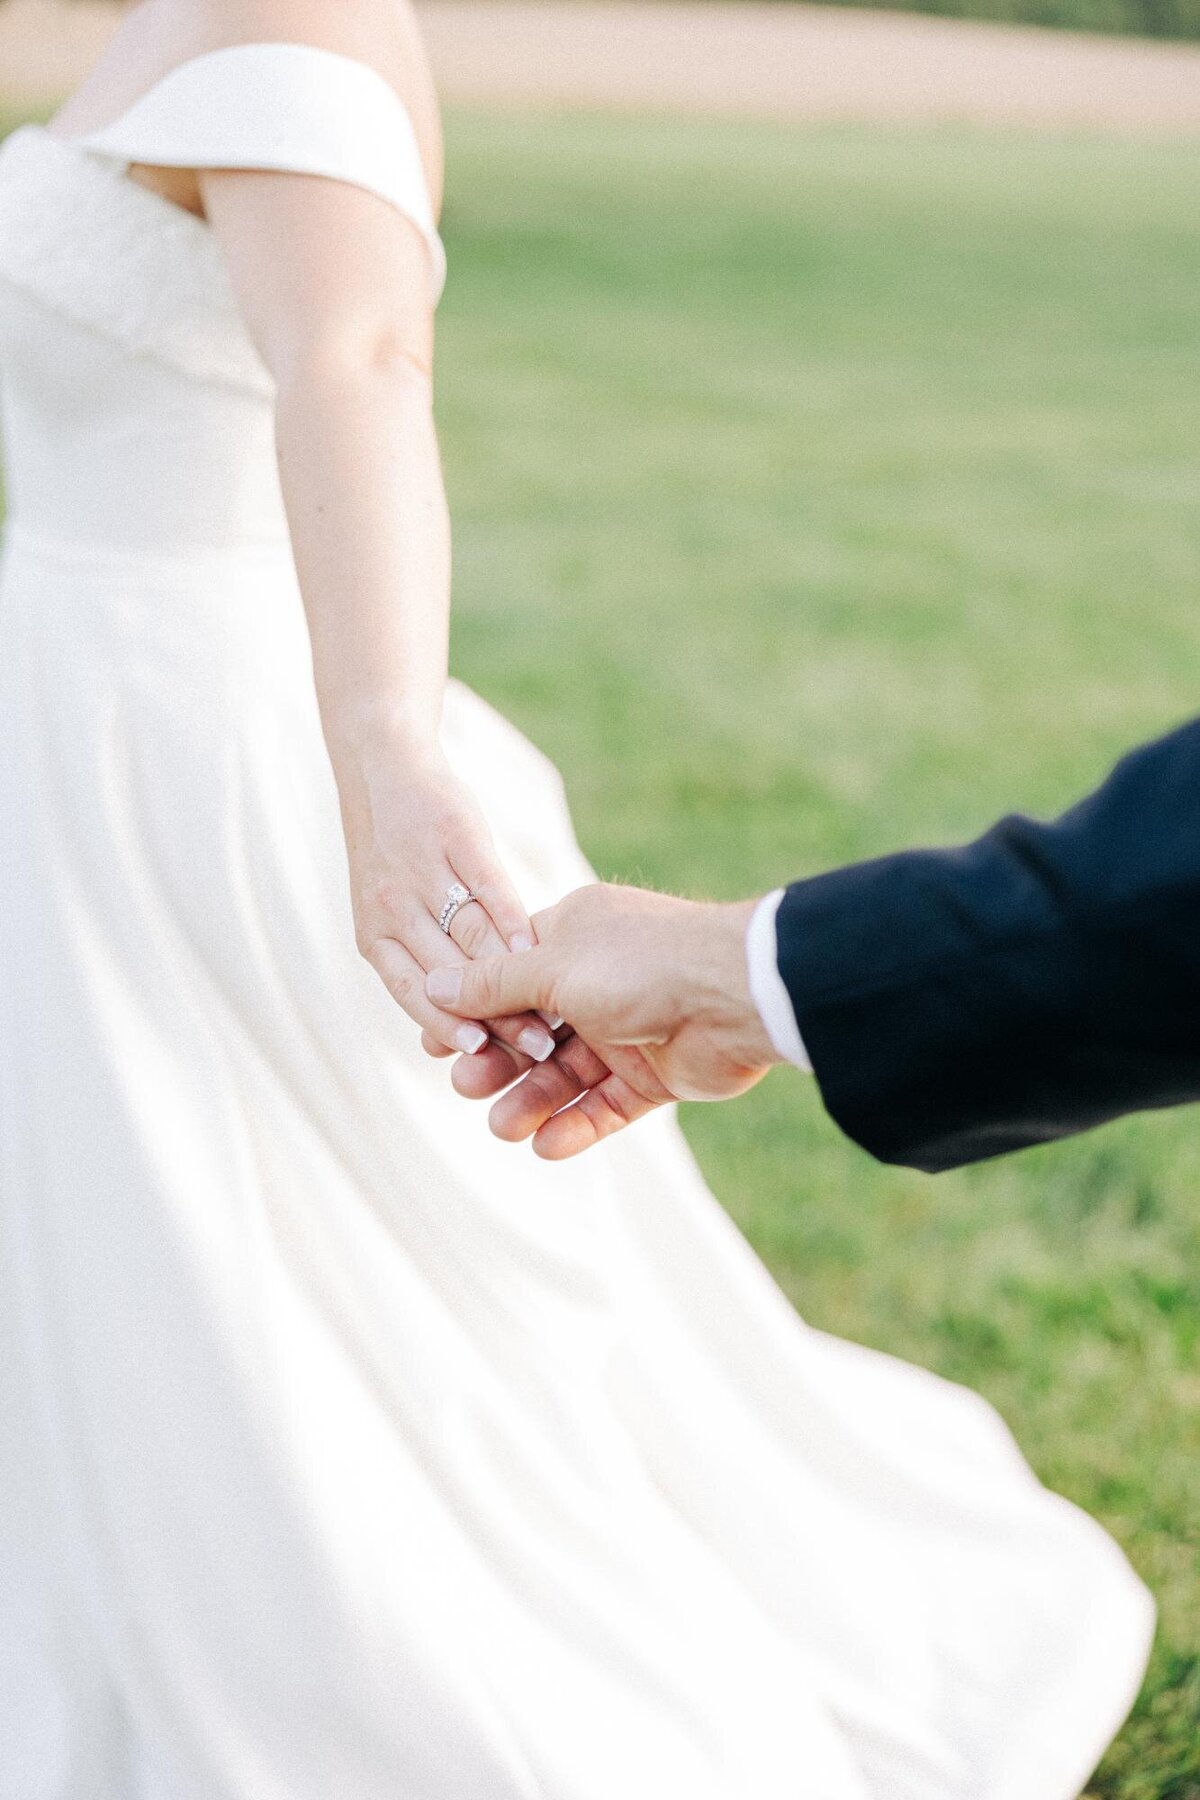 A bride and groom holding hands, with a focus on their intertwined fingers.